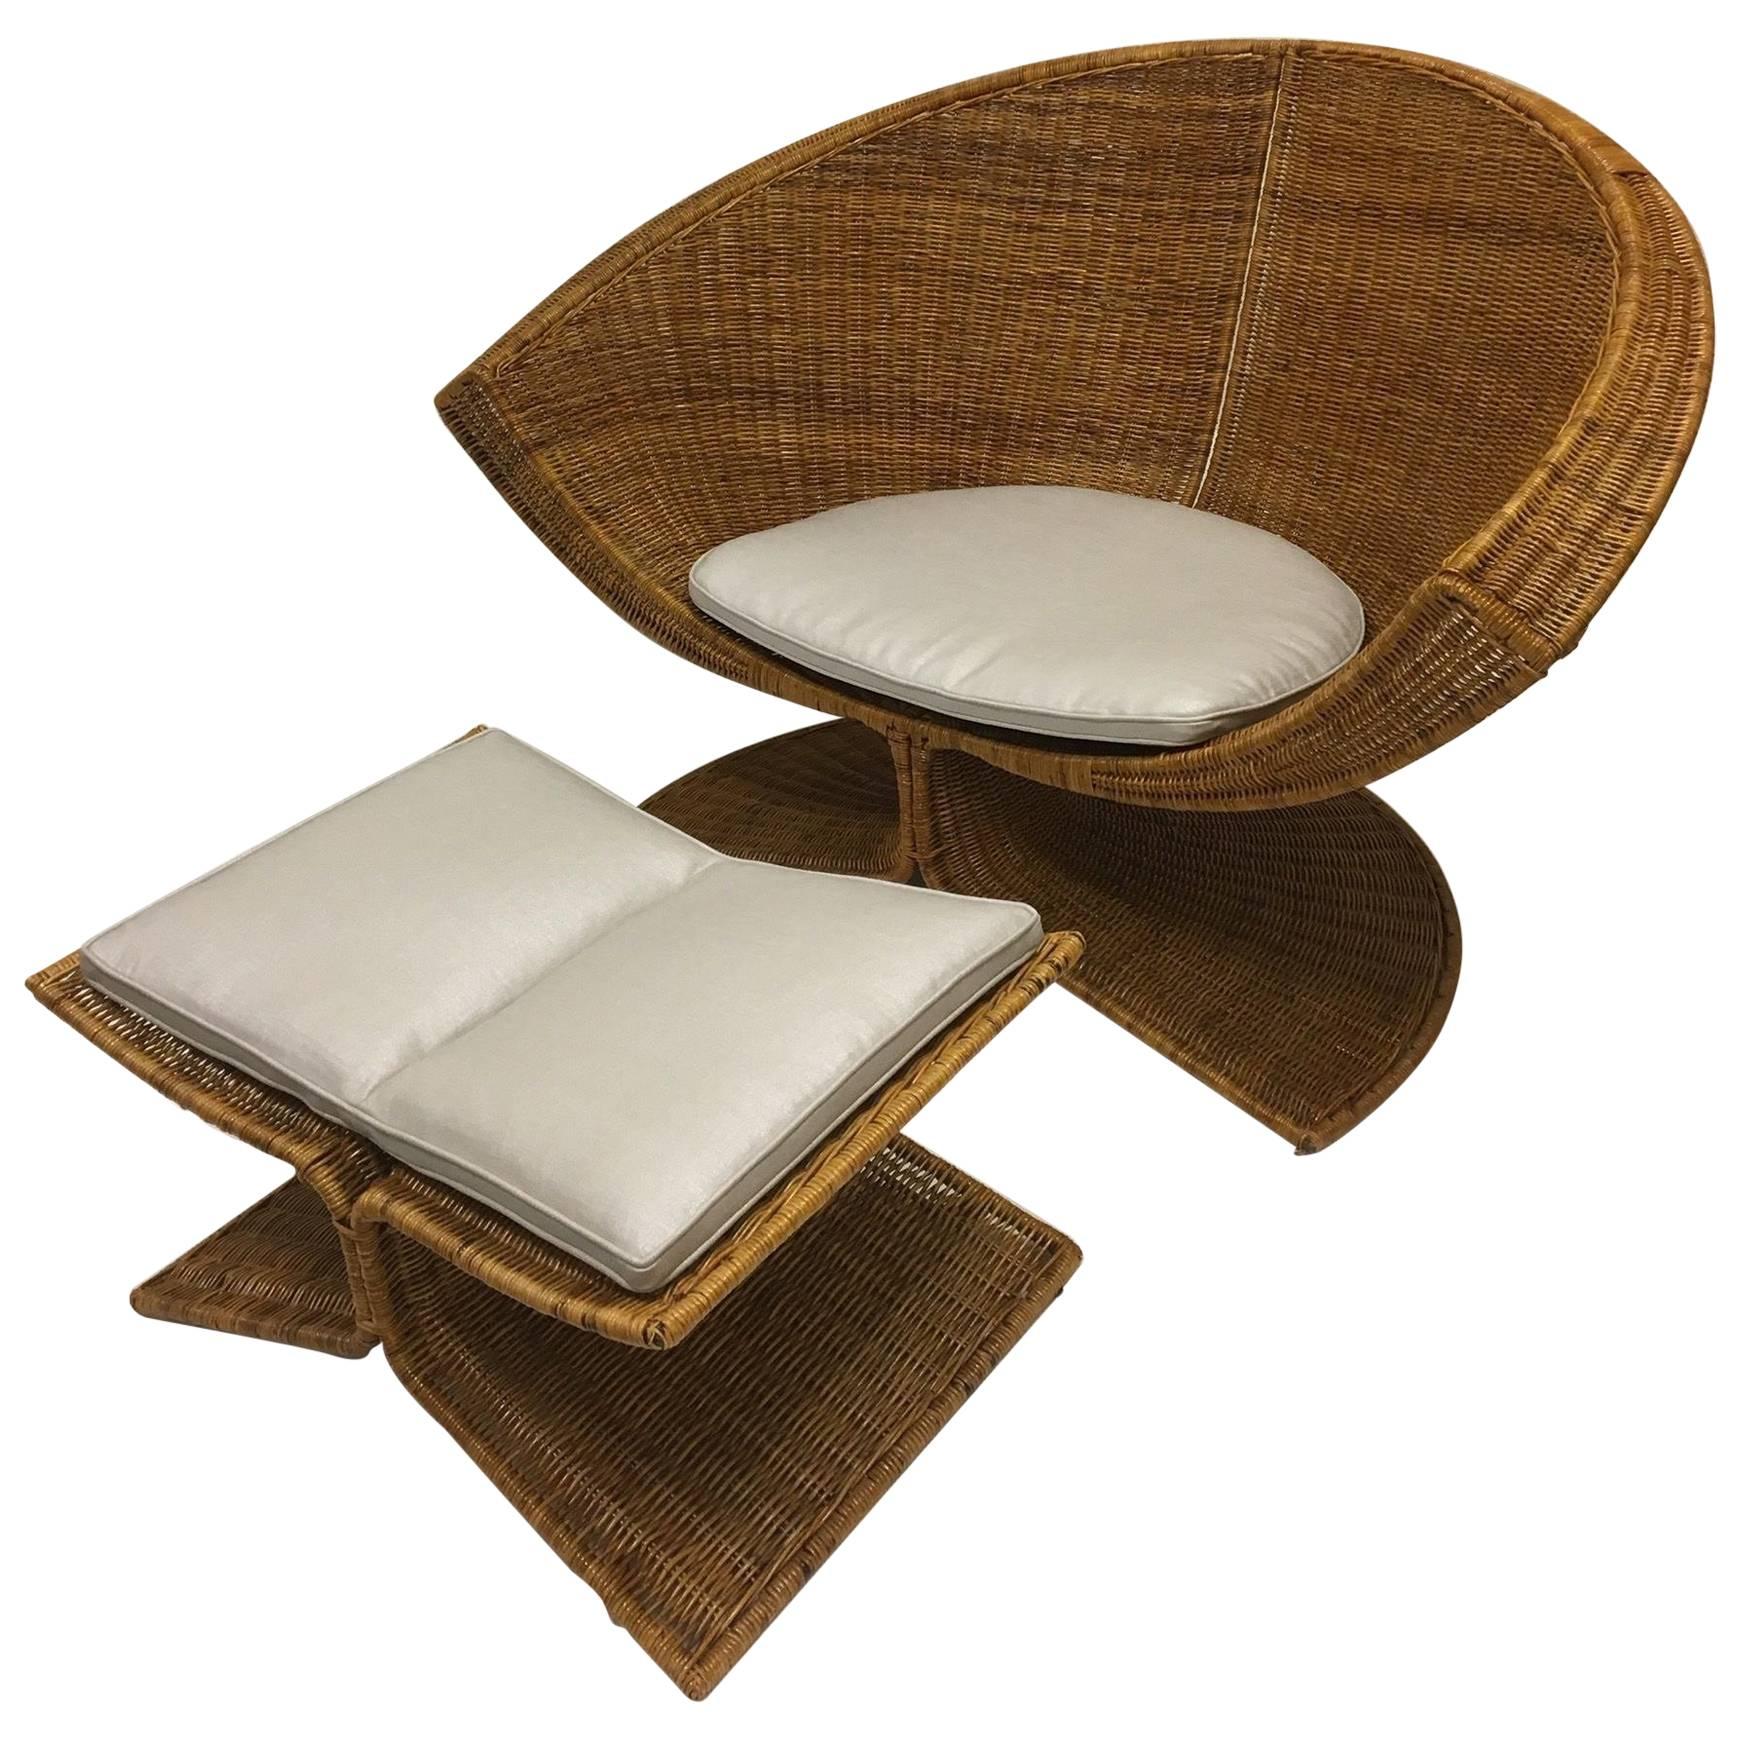 Rare “Lotus” Wicker  Lounge Chair and Ottoman by Miller Yee Fong